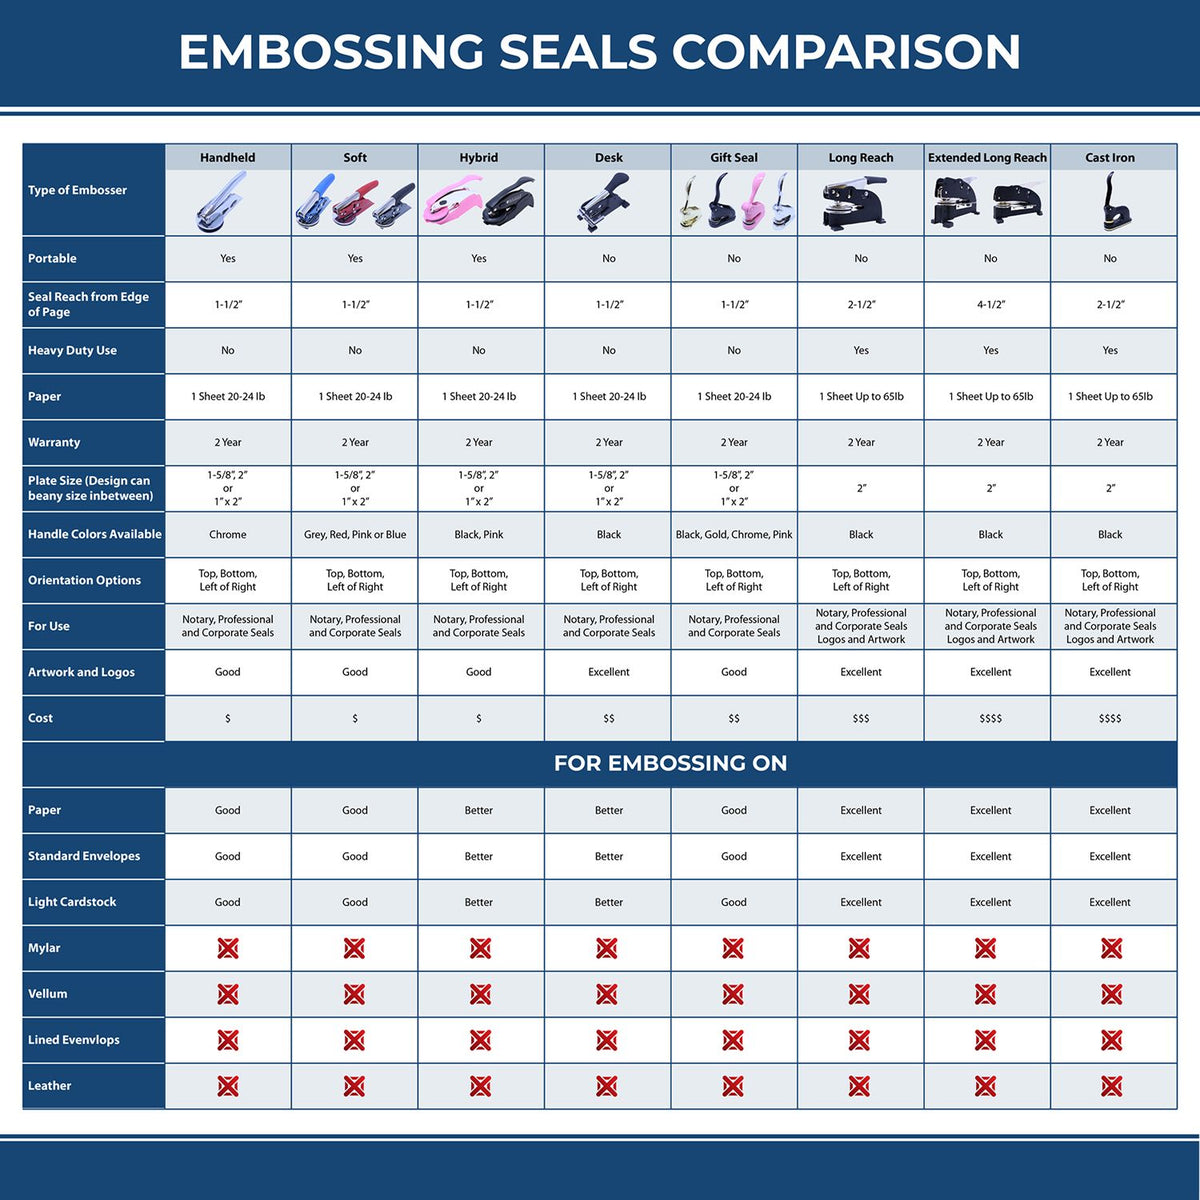 A comparison chart for the different types of mount models available for the Heavy Duty Cast Iron Missouri Engineer Seal Embosser.